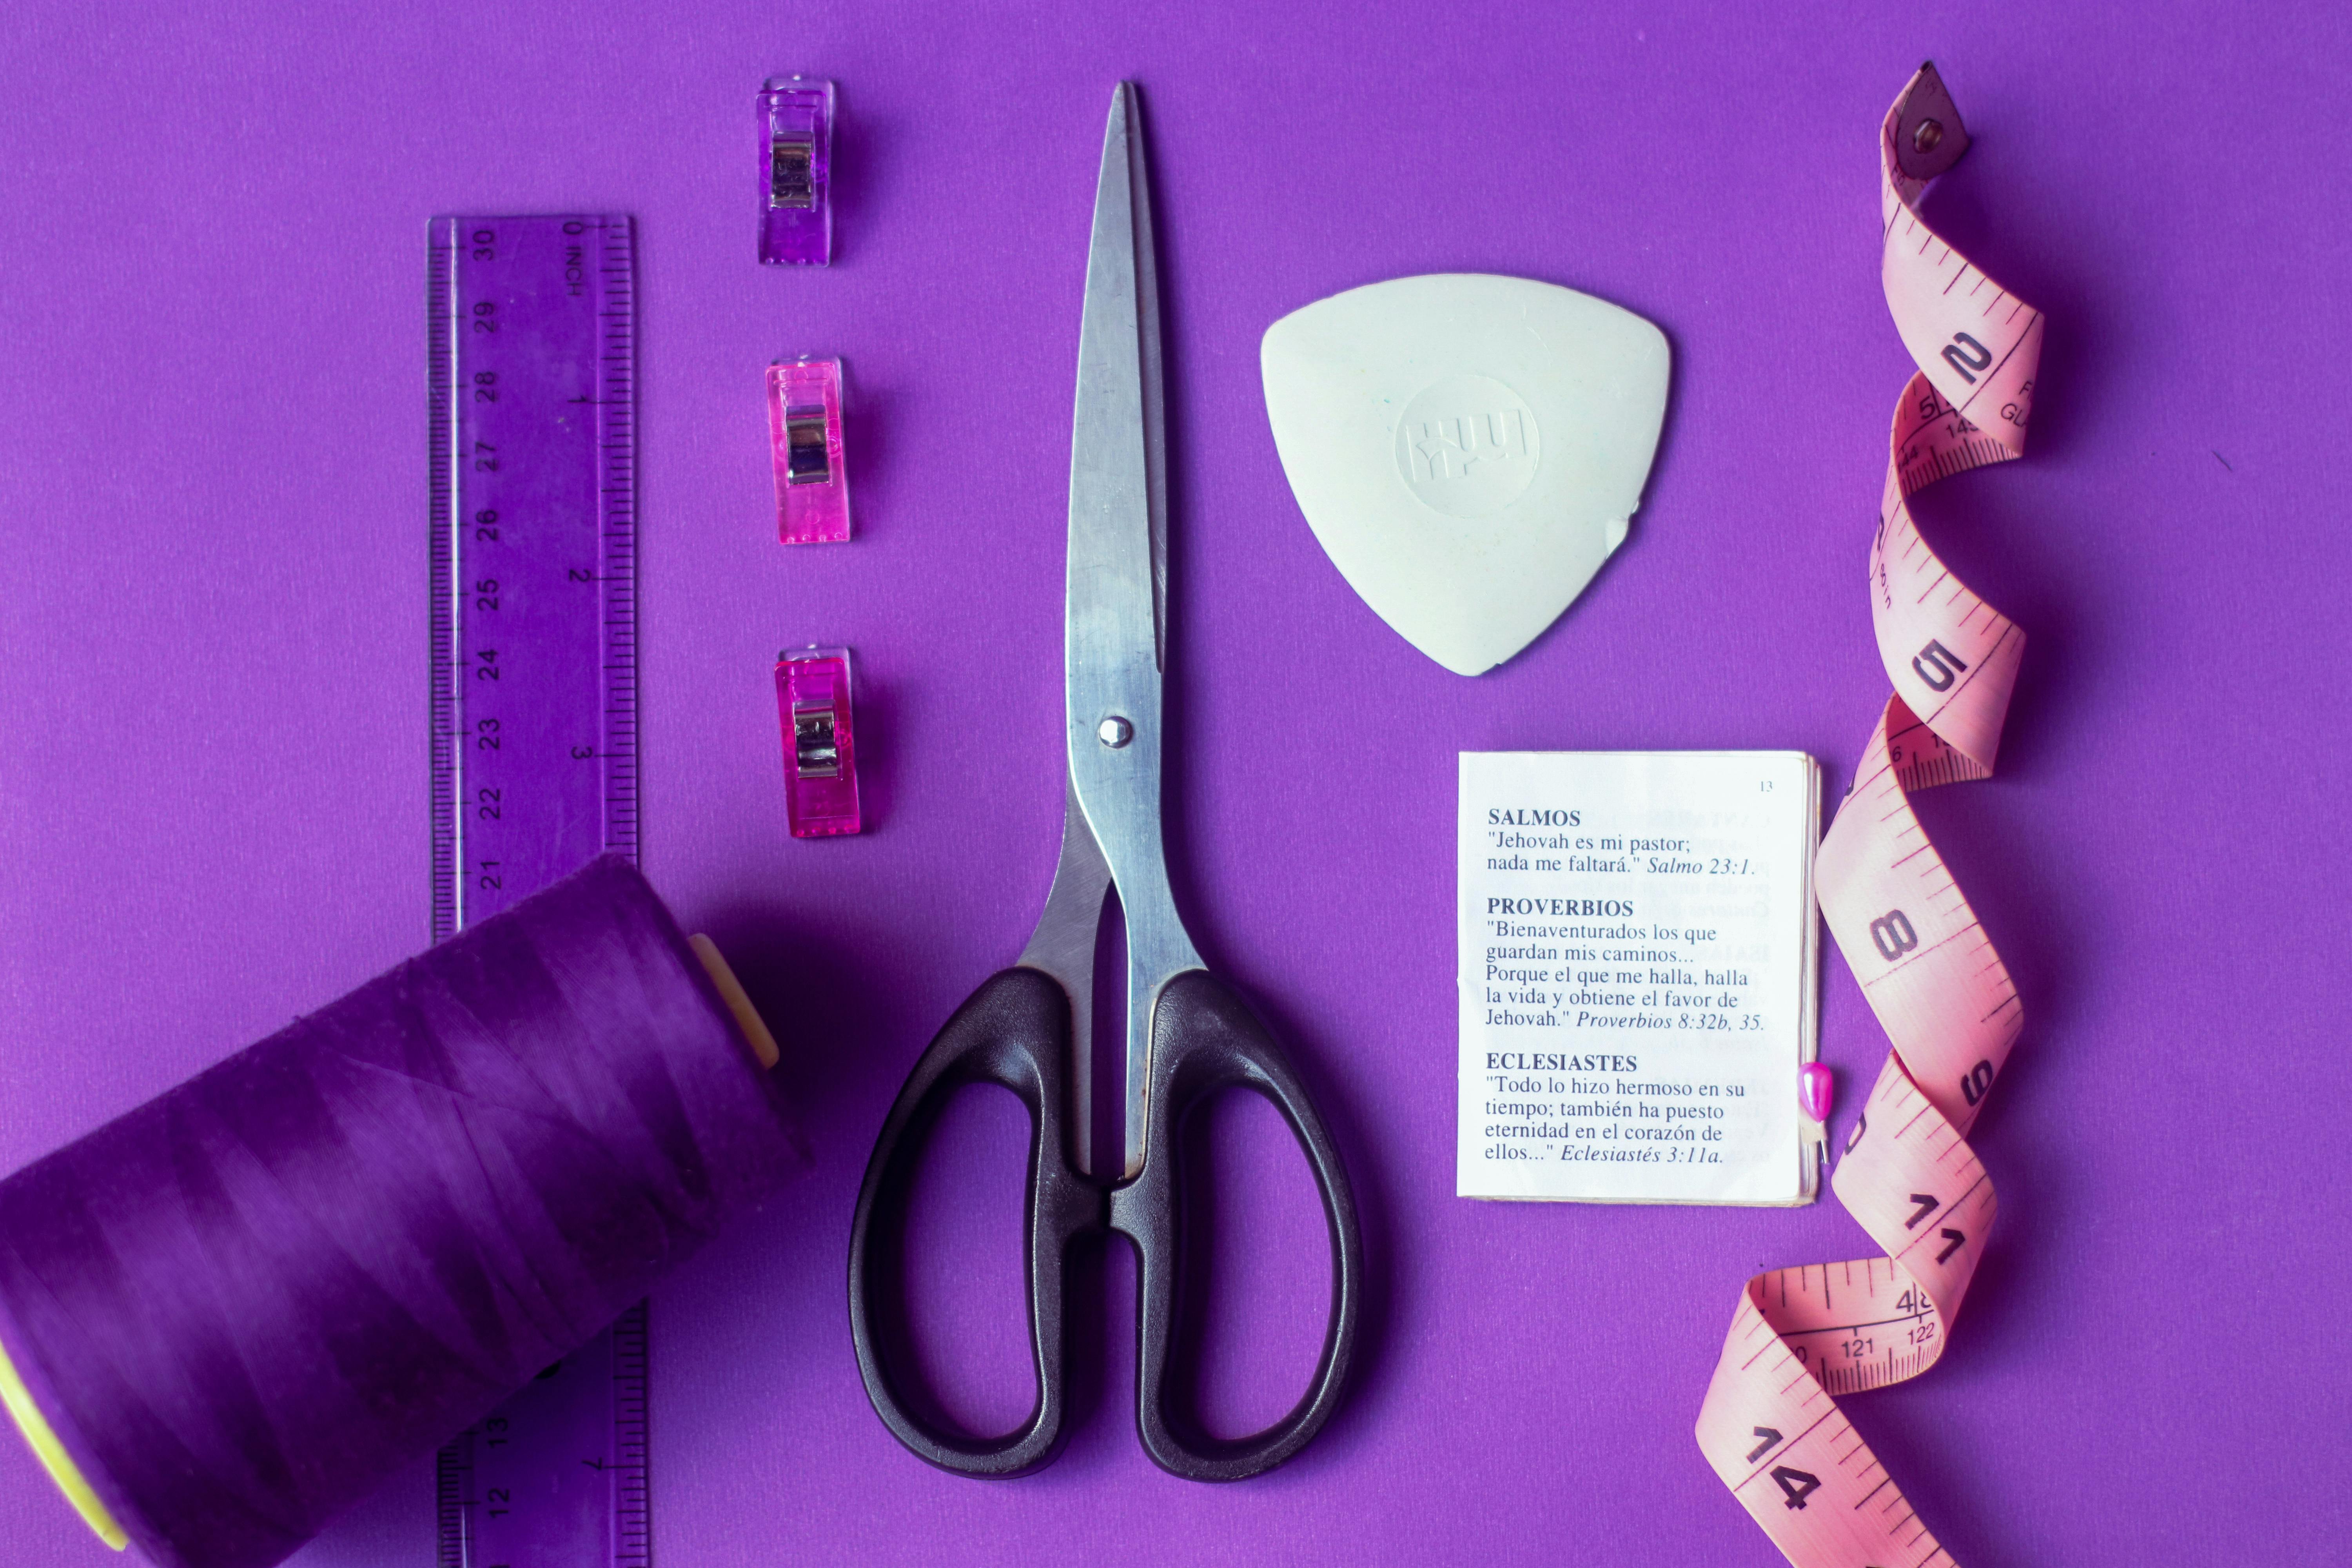 Sewing tools and accessories - a Royalty Free Stock Photo from Photocase